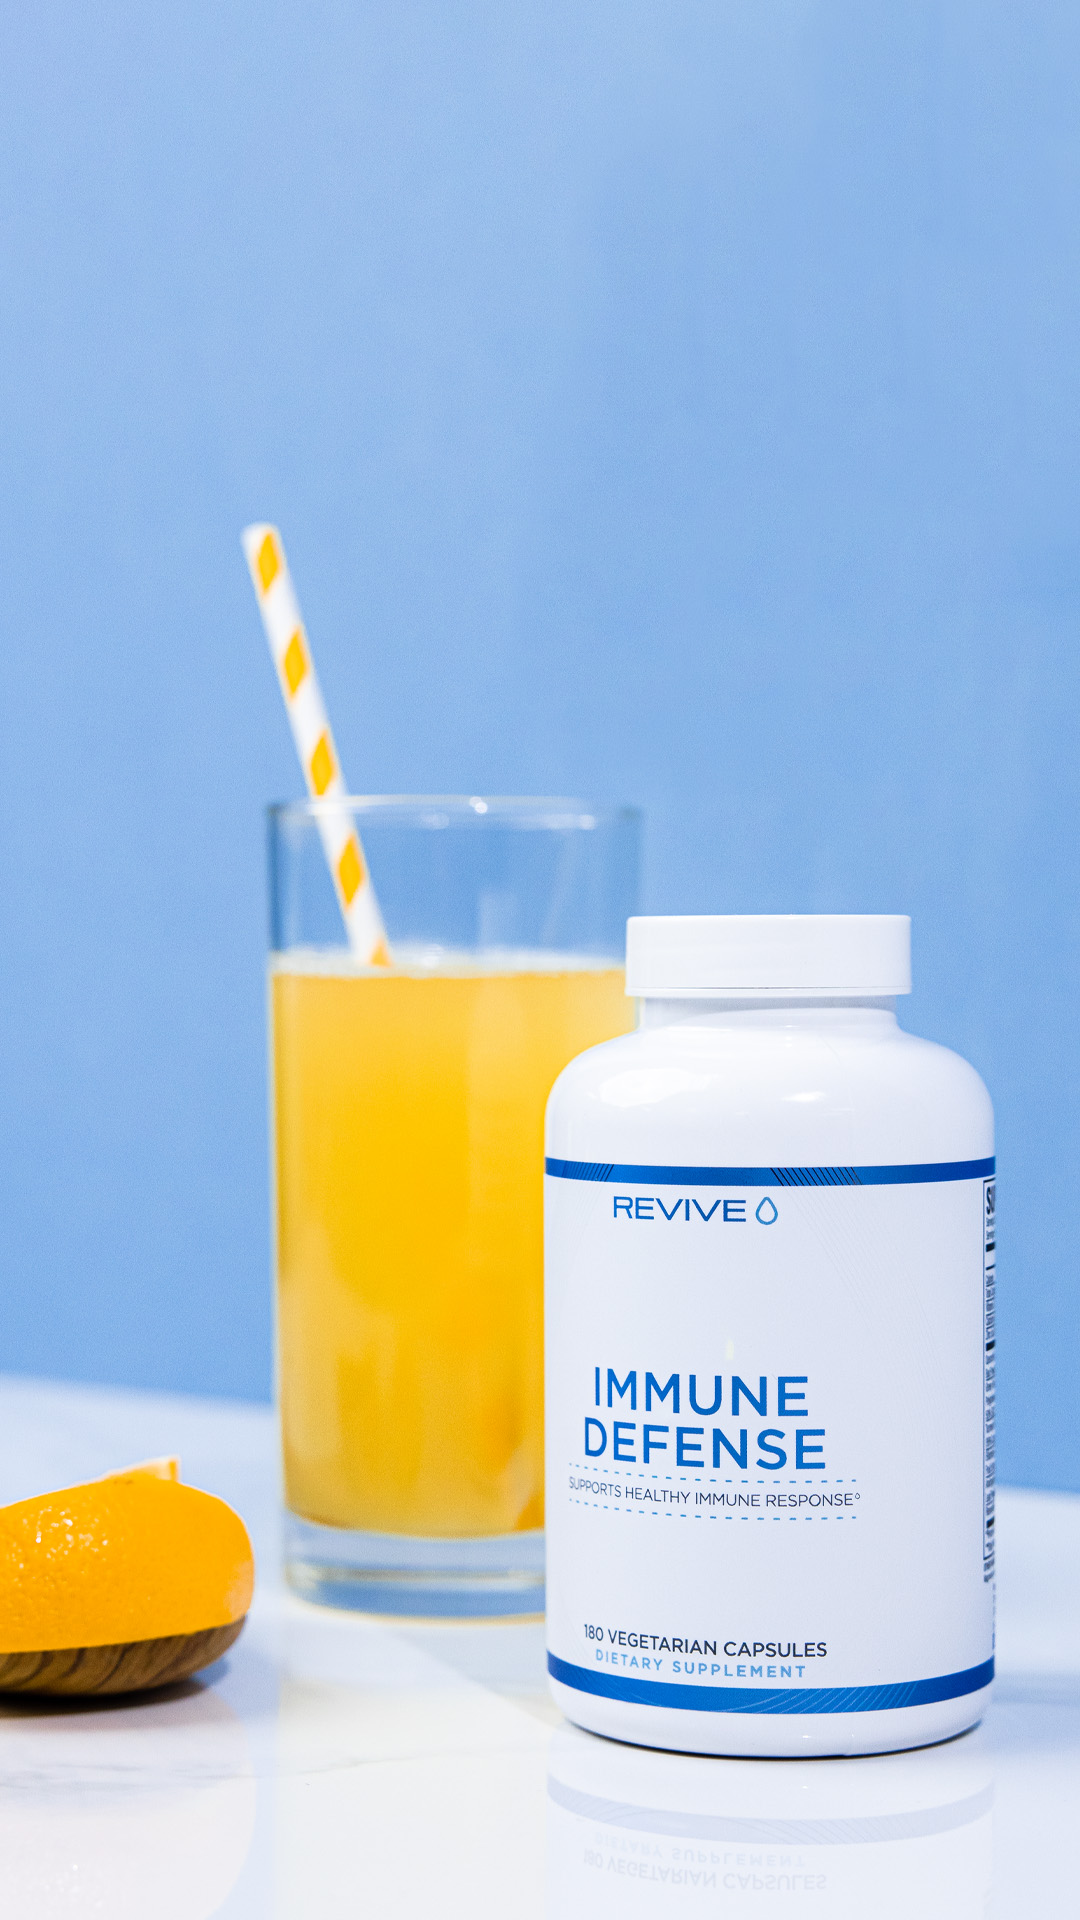 Revive MD Immune System Supplement